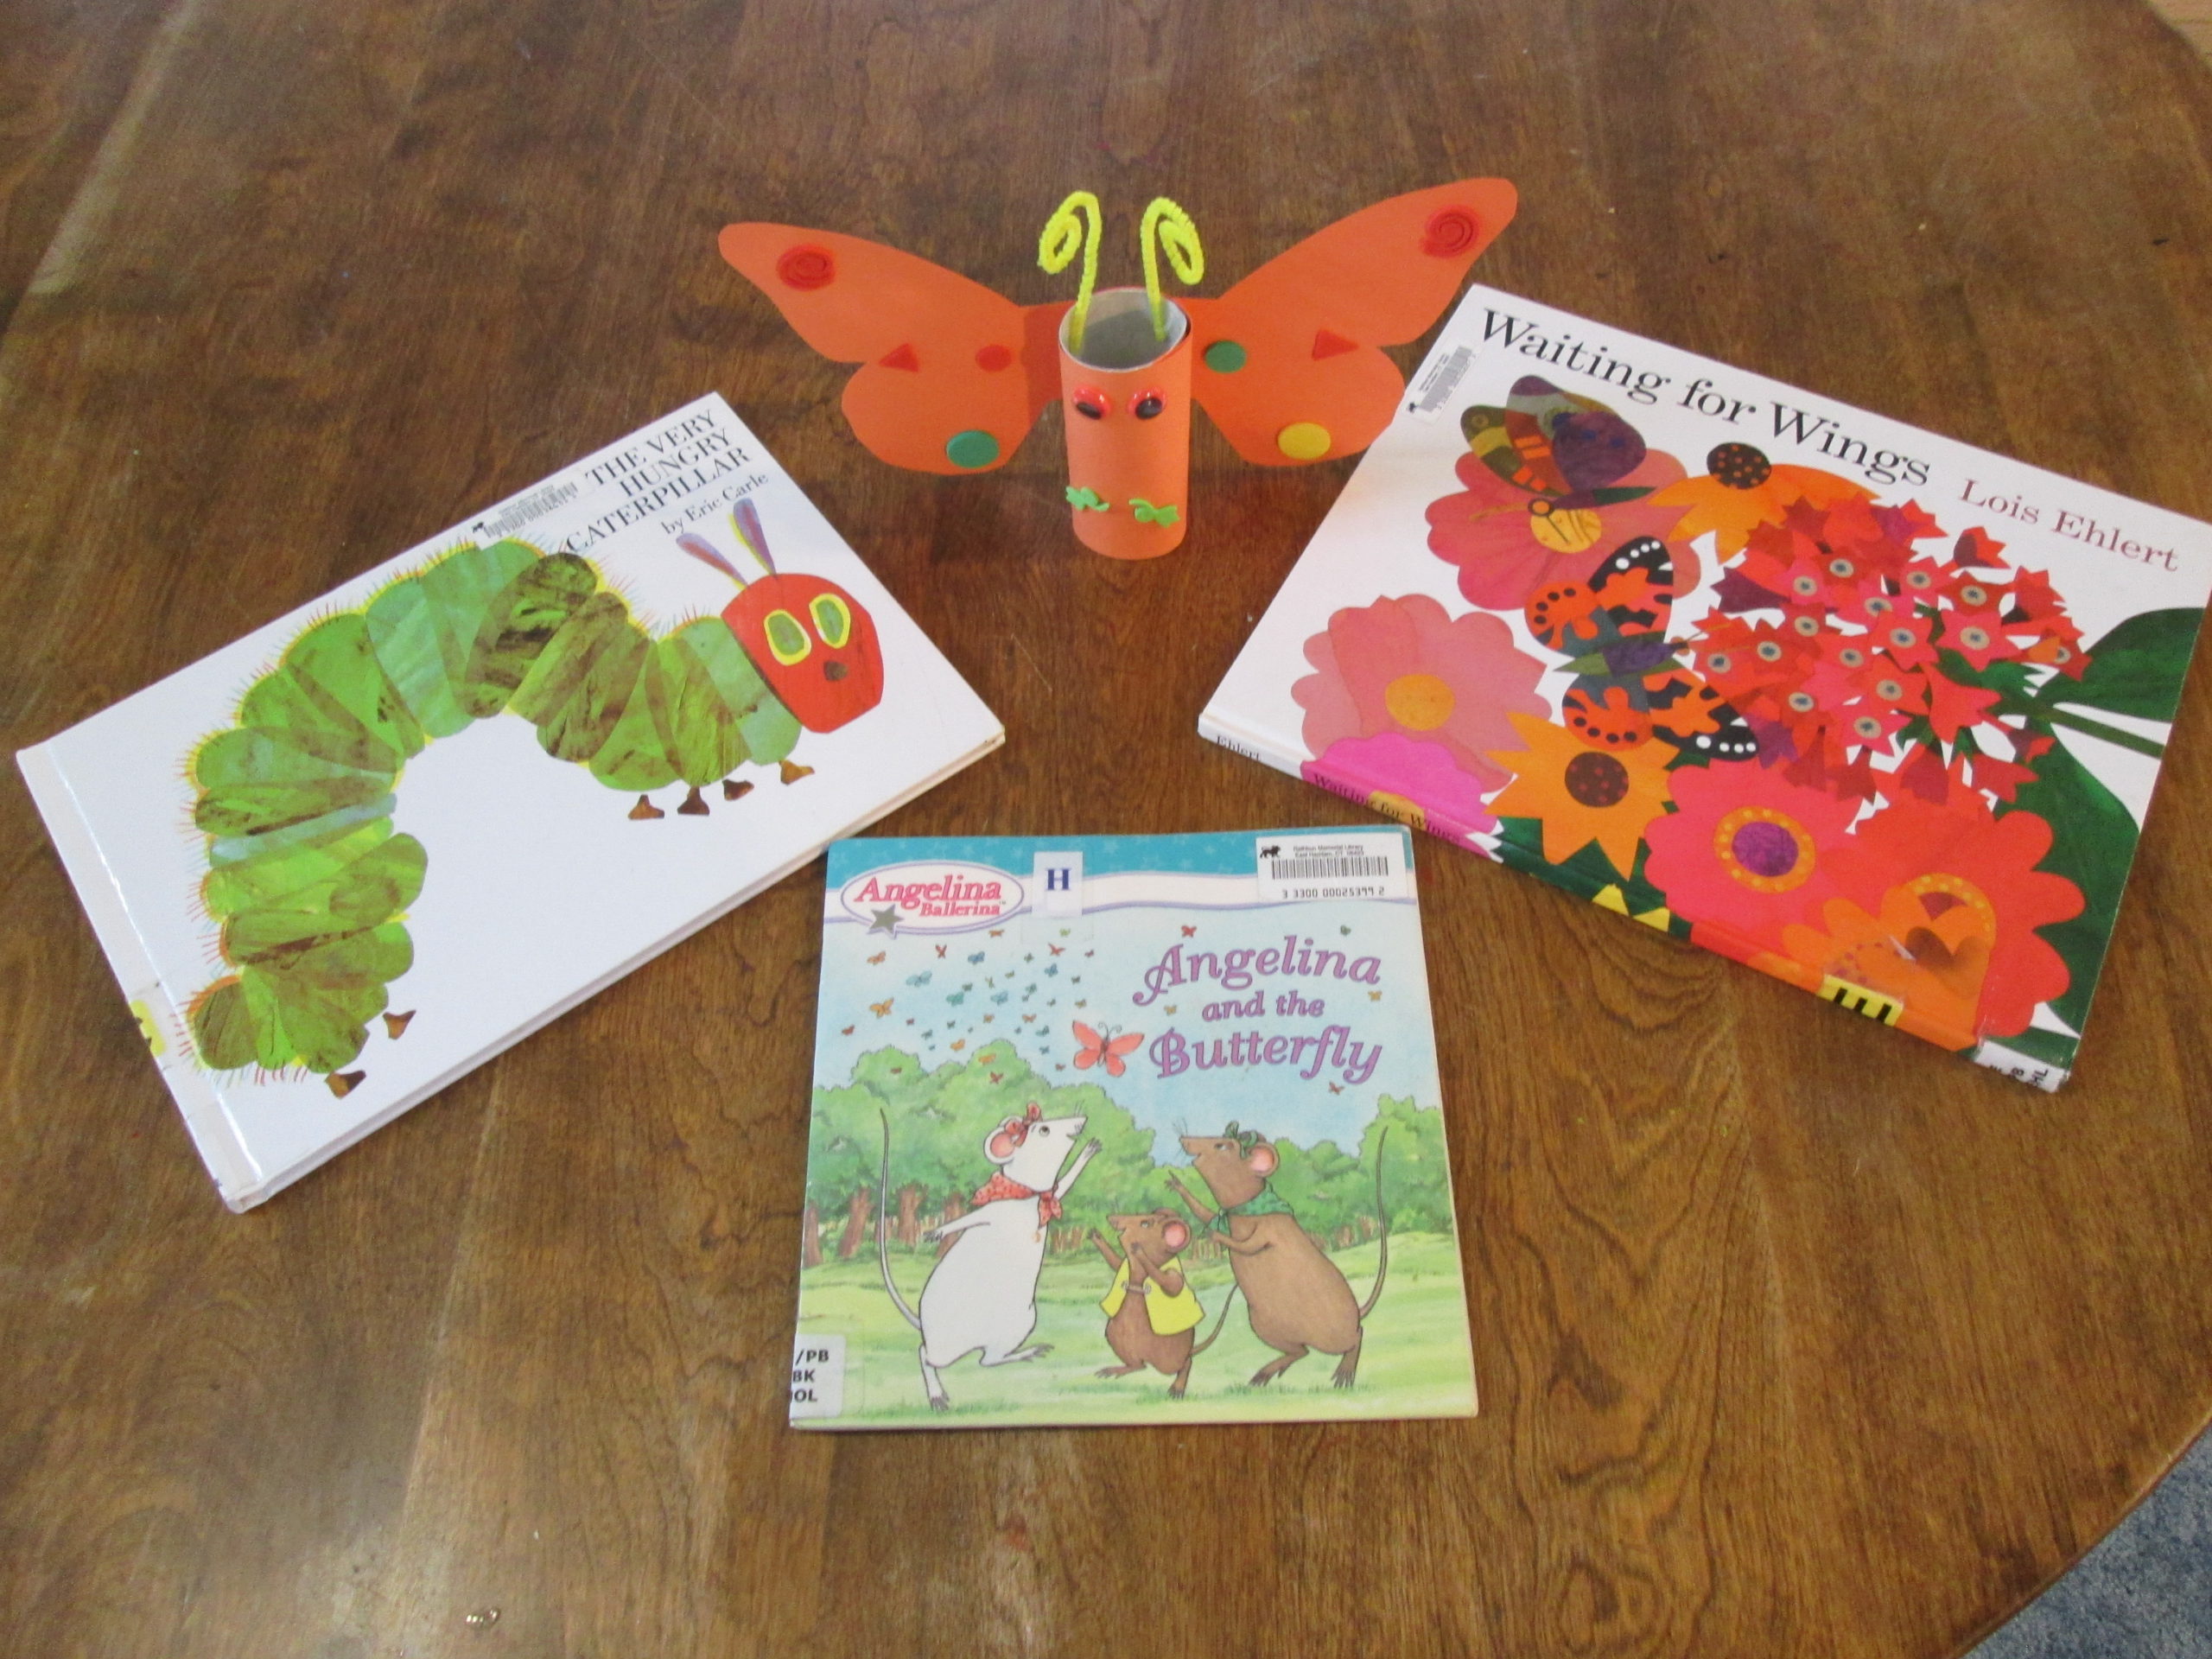 Tuesday April 11th Butterfly Storytime